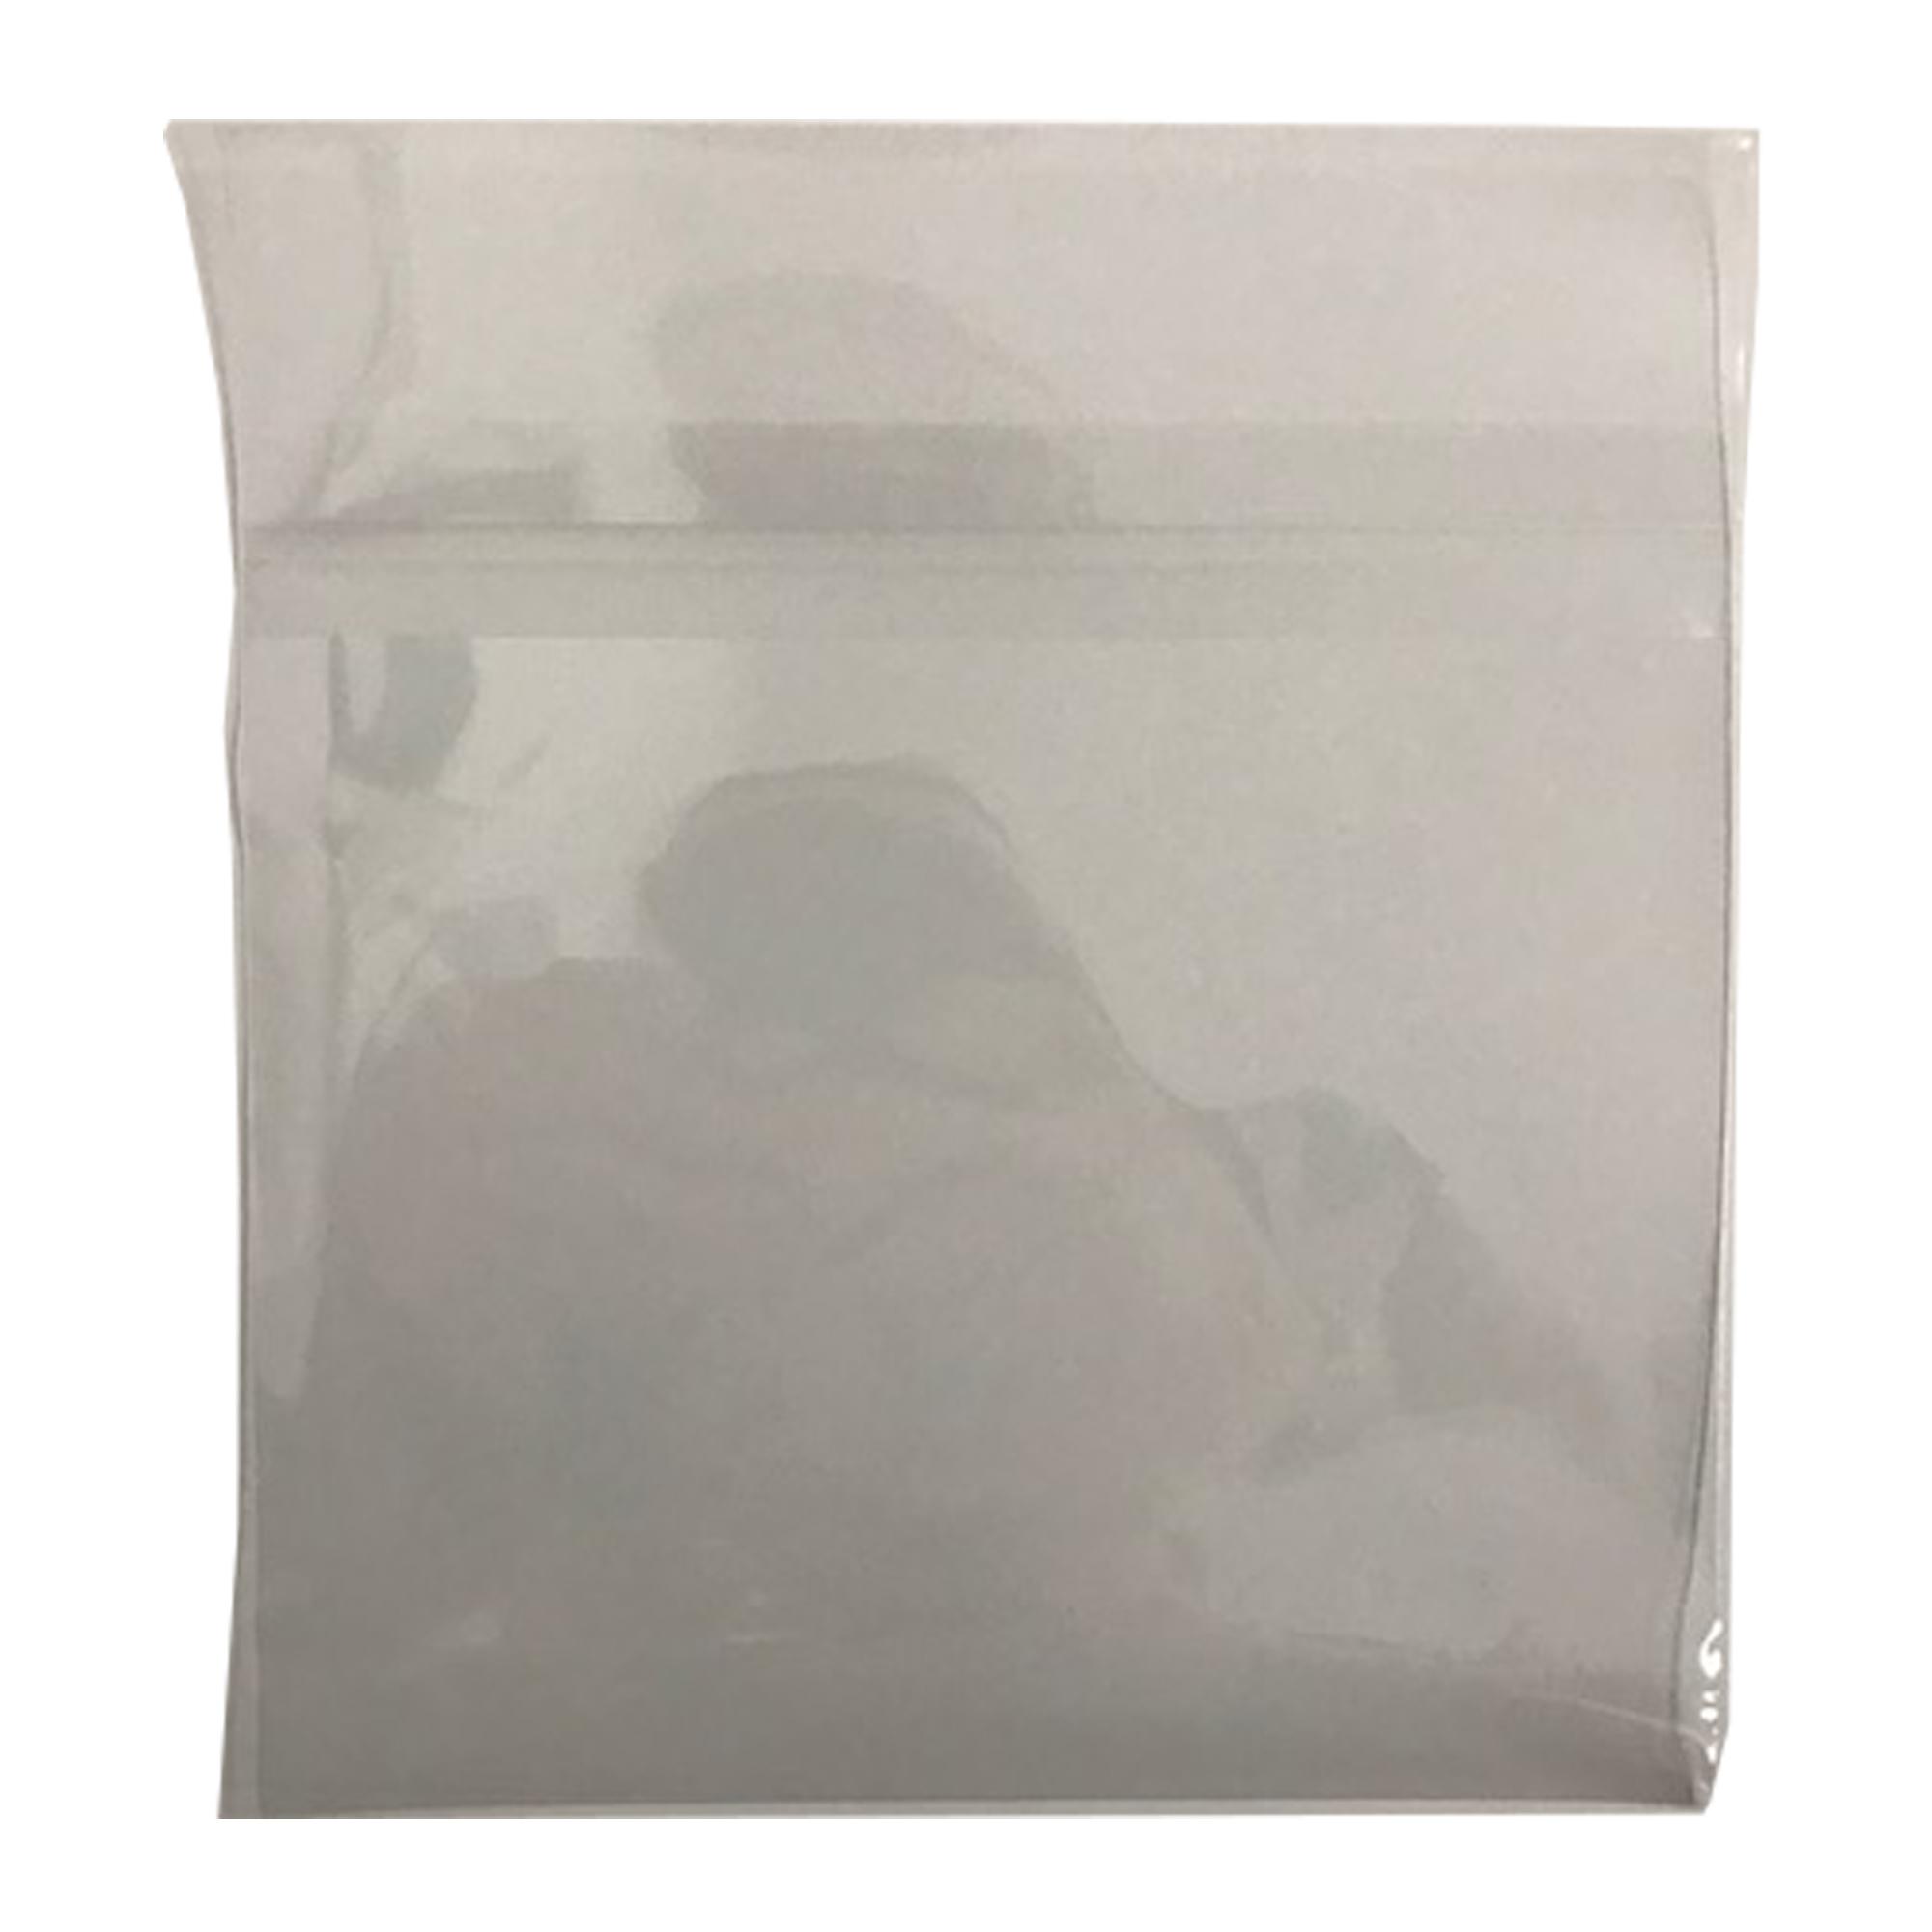 Clear OPP Blake Record Sleeve for 7" Vinyl with flap (Pack of 10)